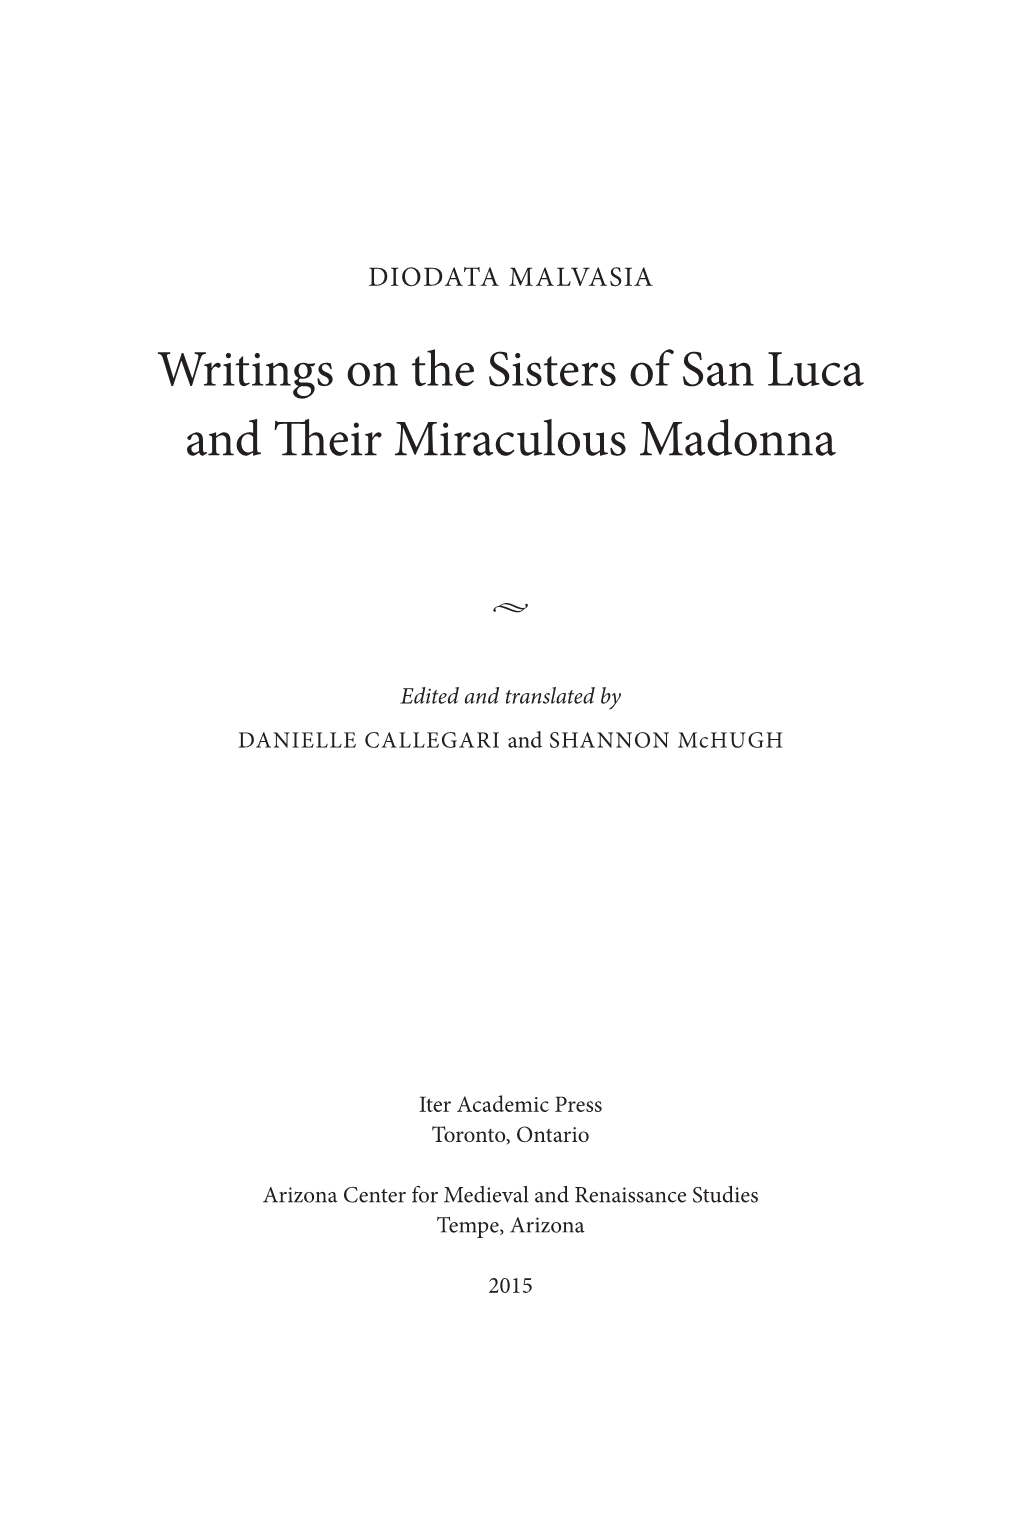 Writings on the Sisters of San Luca and Their Miraculous Madonna